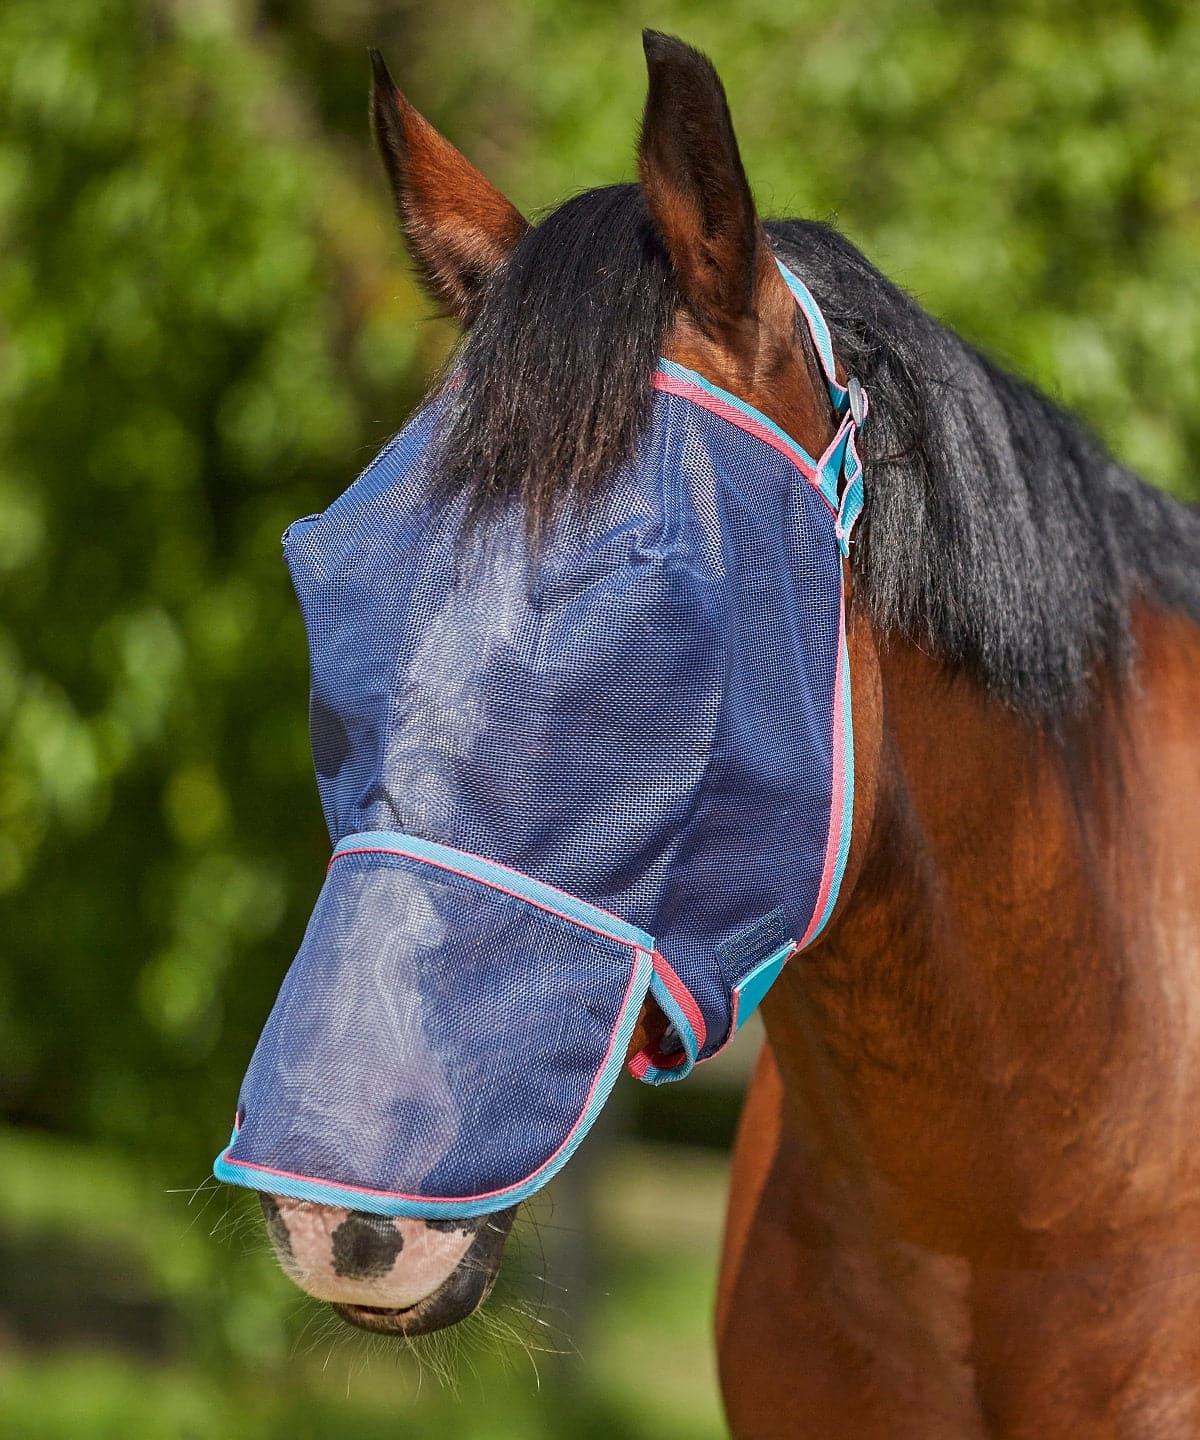 Saxon Buzzaway Fly Mask with Nose Net - Navy/Turqoise/Pink